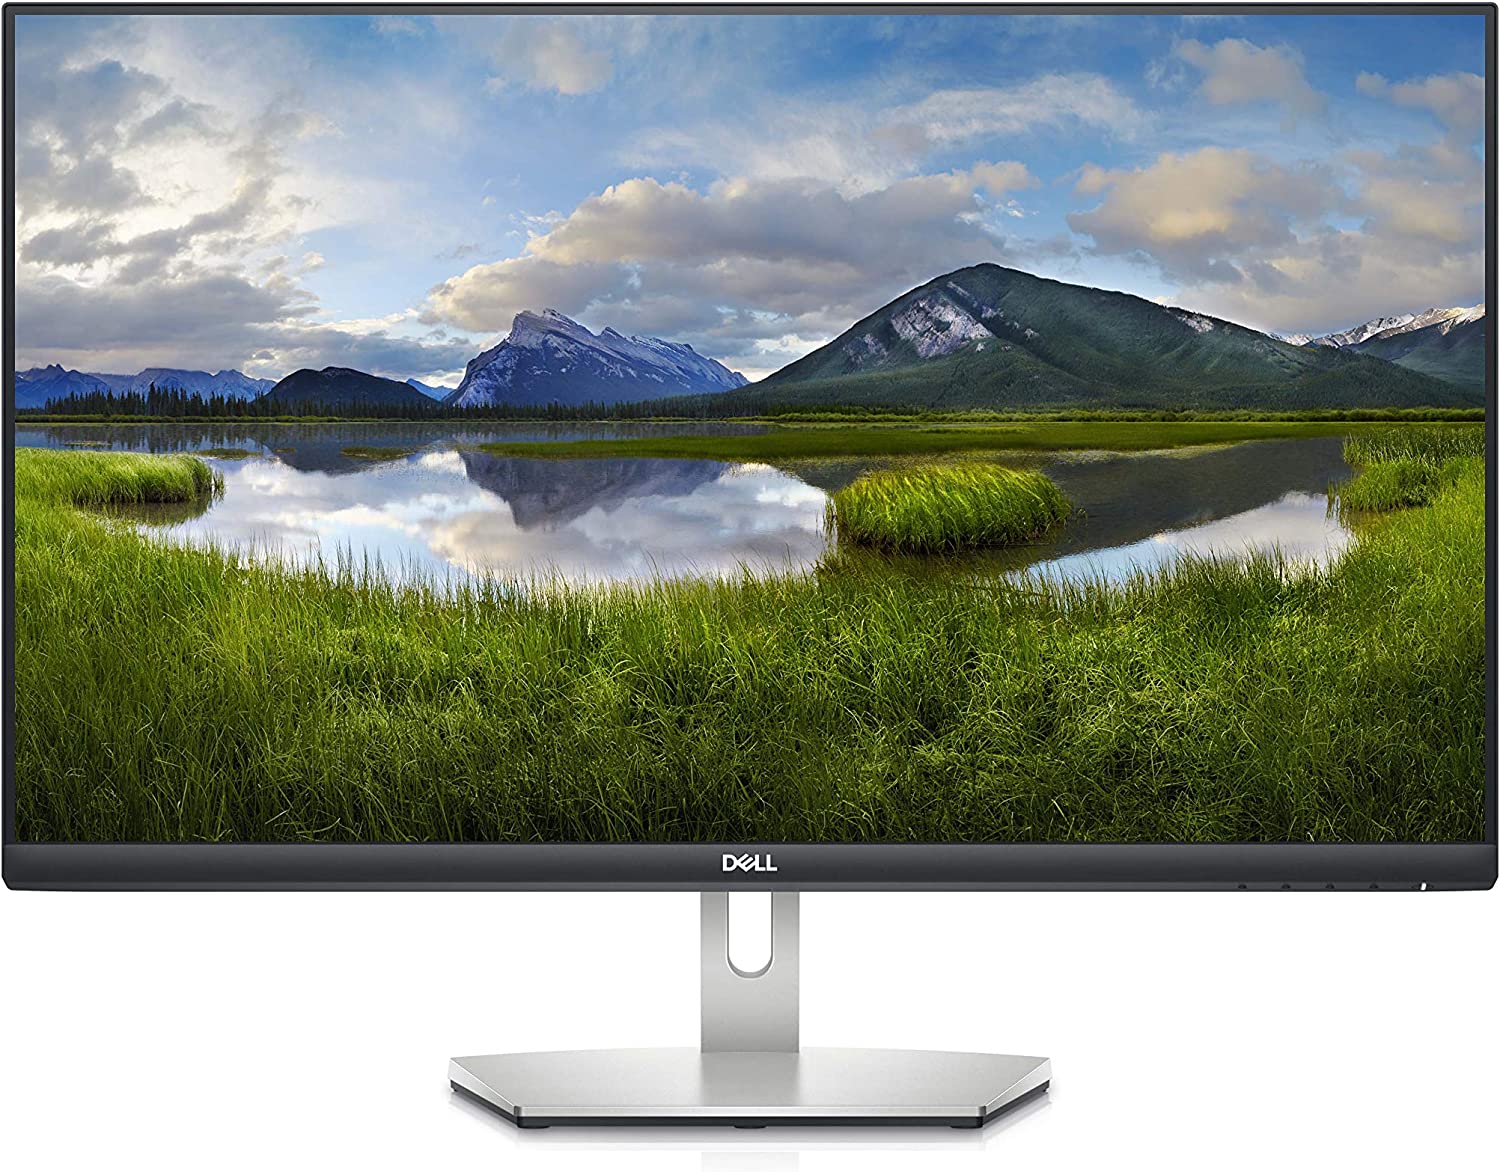 Dell S2721D 27 Inch 1440p IPS Monitor $200 at Amazon